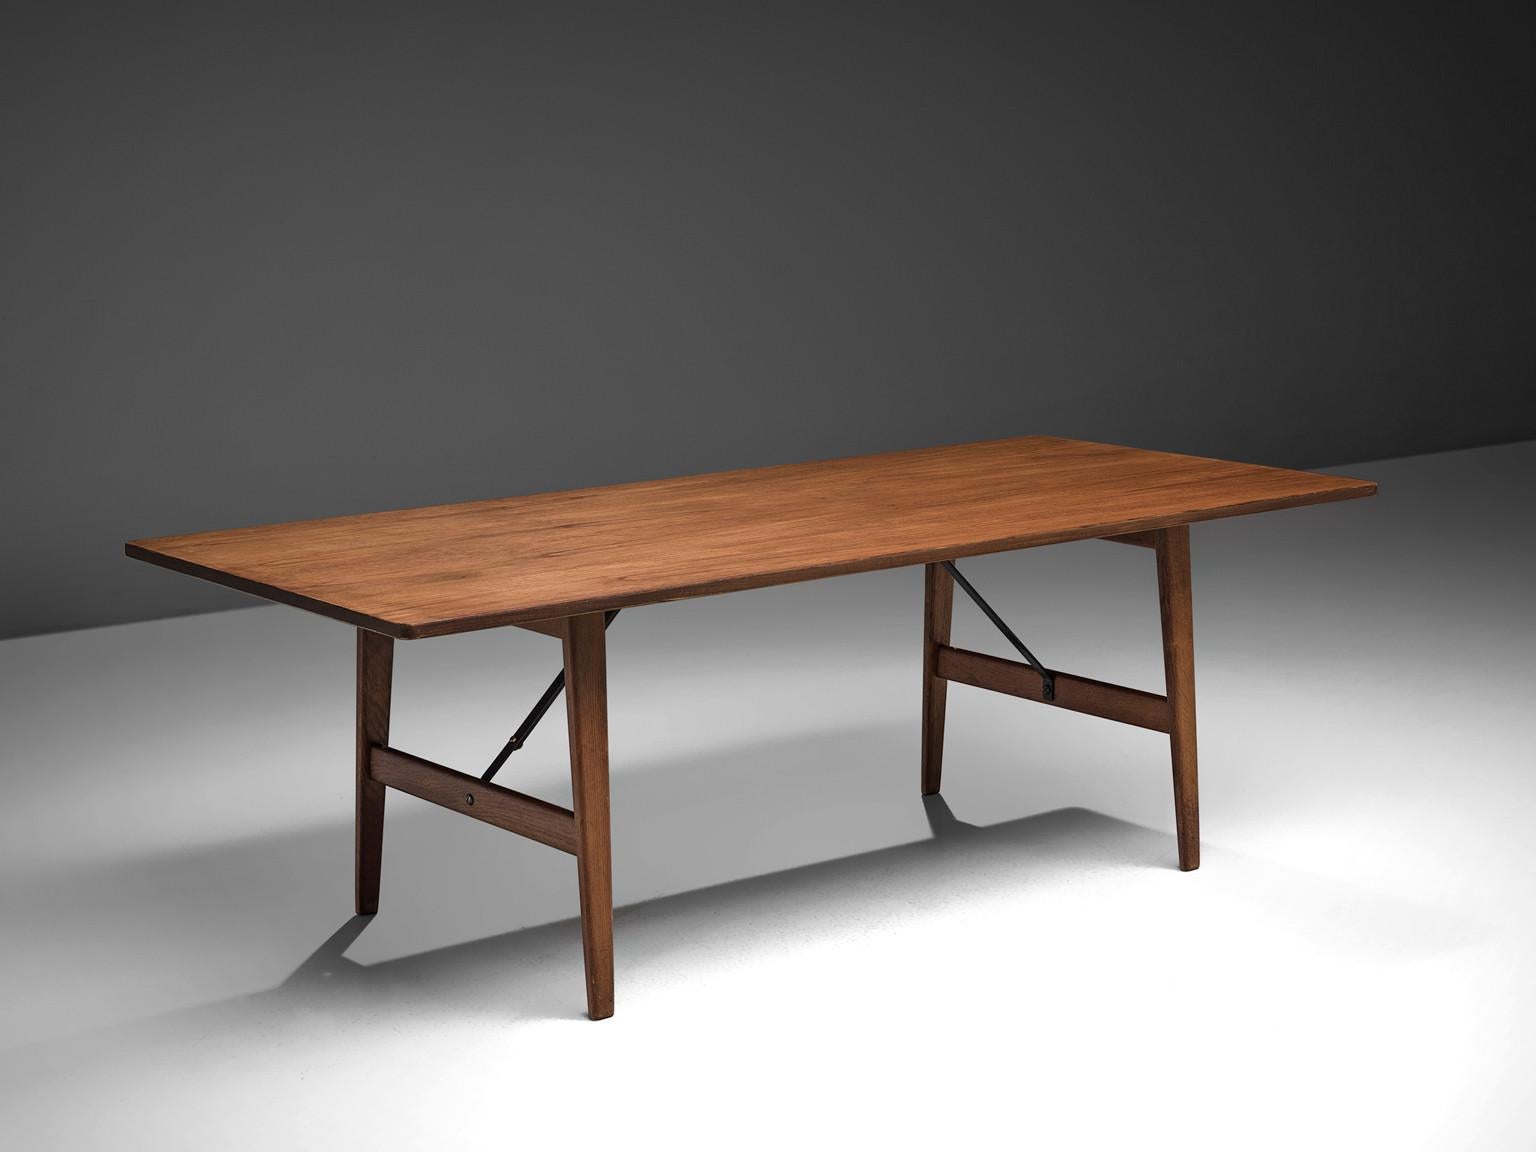 Børge Mogensen for Fredericia, table model 281, teak, metal, Denmark, designed in 1956

This modest, simplistic dining table is characterized by a strong and solid construction executed in teak. This is realized by the sharp and clear lines which